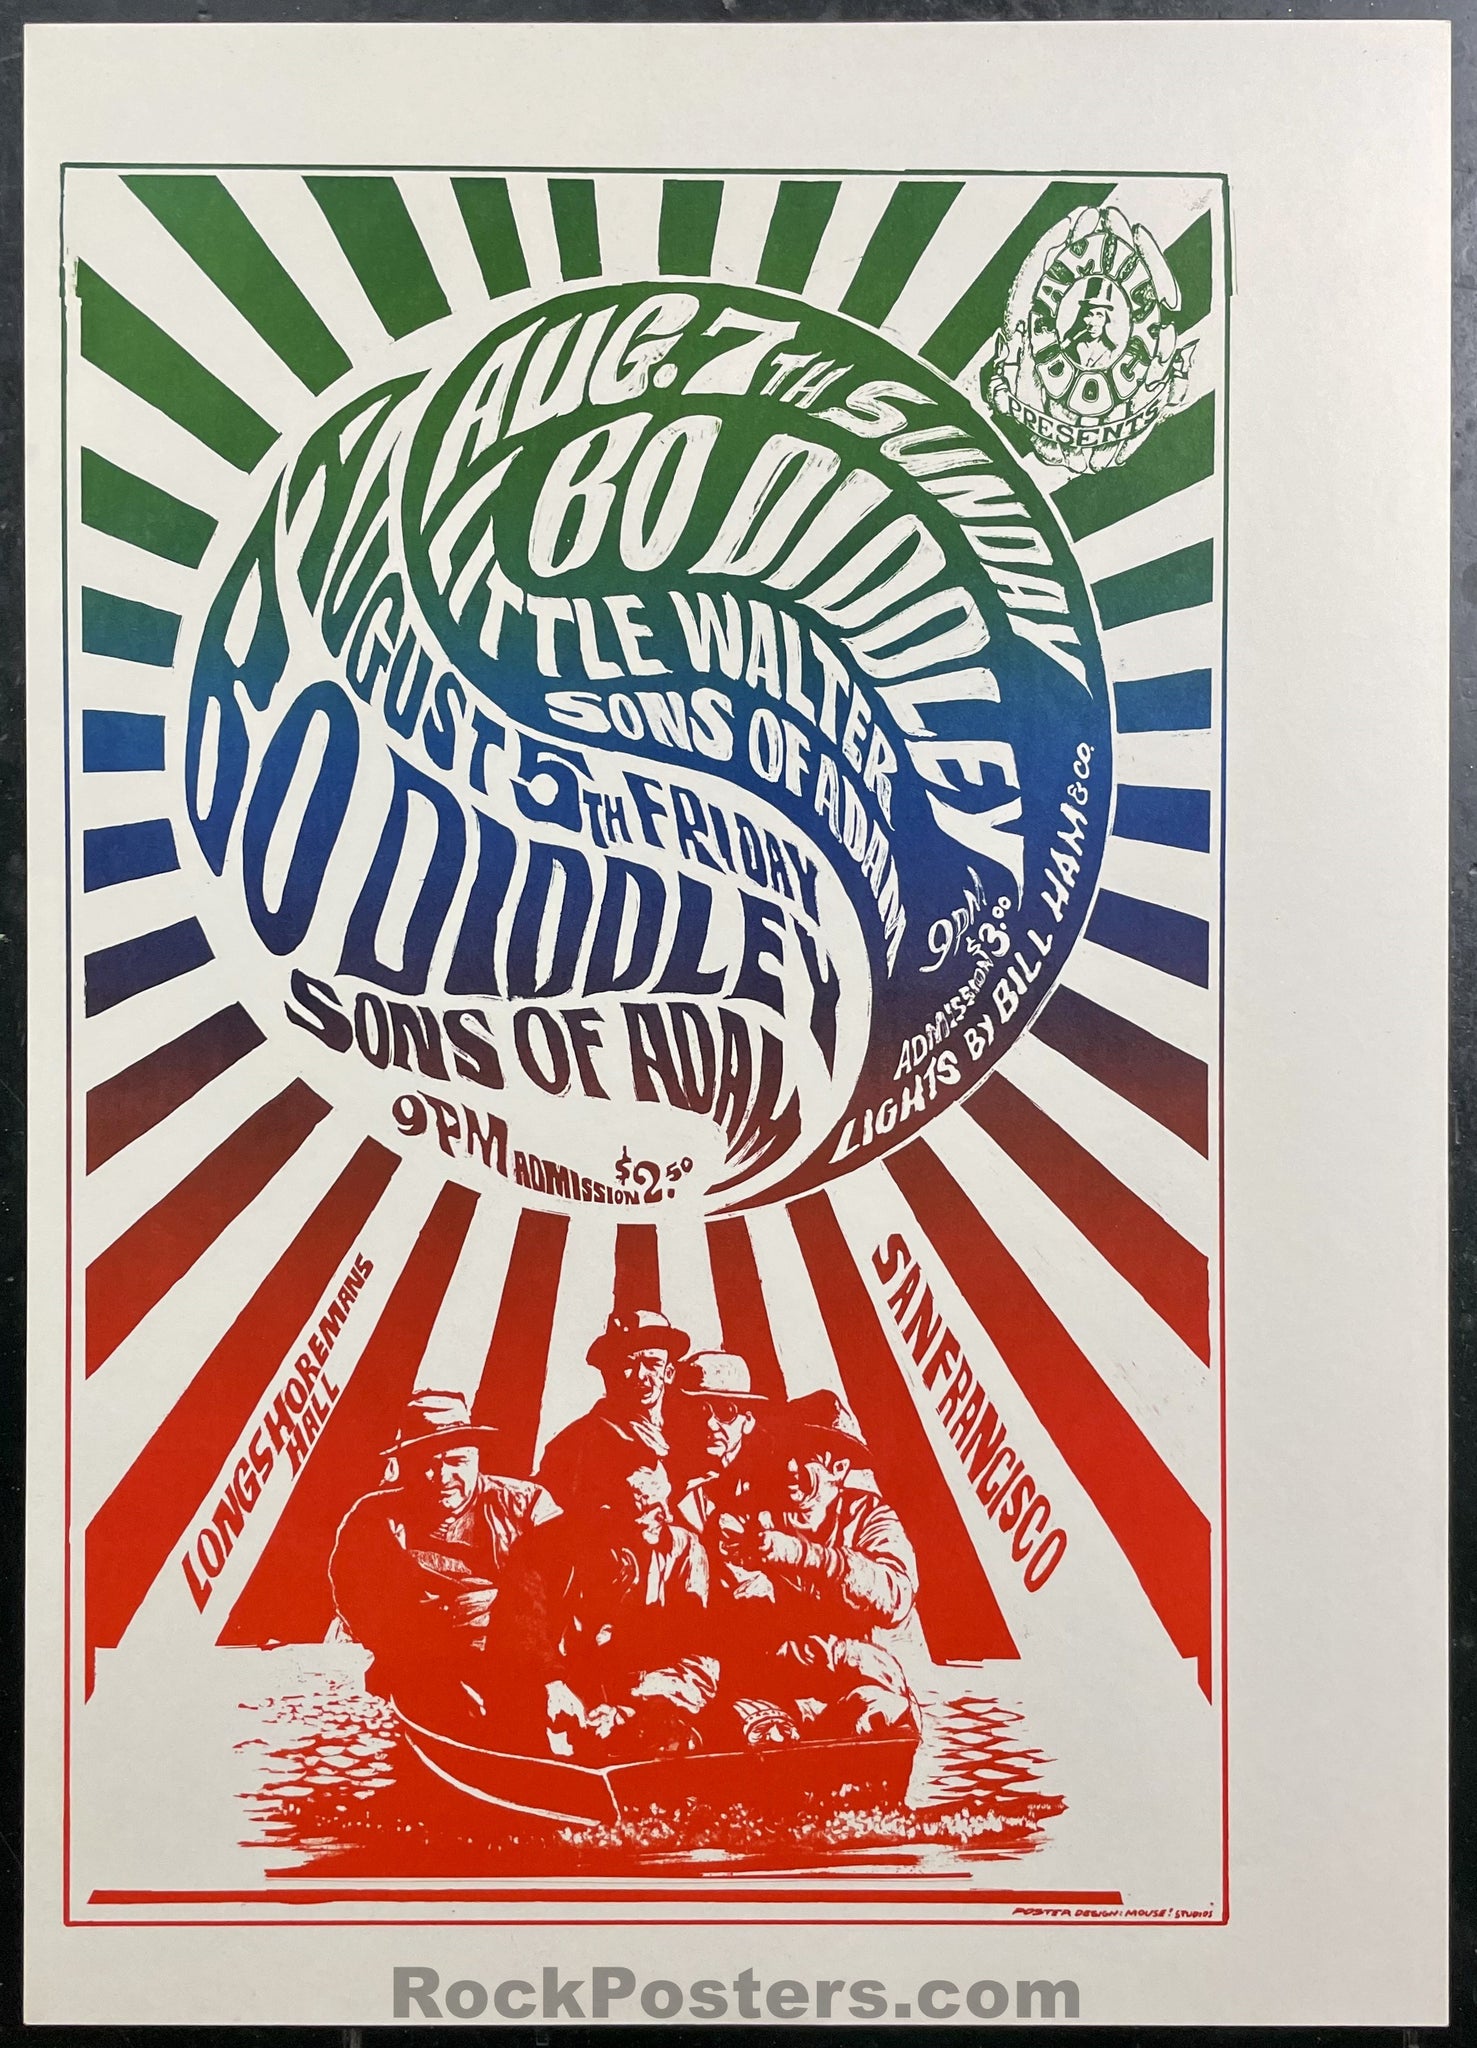 AUCTION - FD-20 - Bo Diddley - Five Men in a Boat - 1966 Poster - Avalon Ballroom - Near Mint